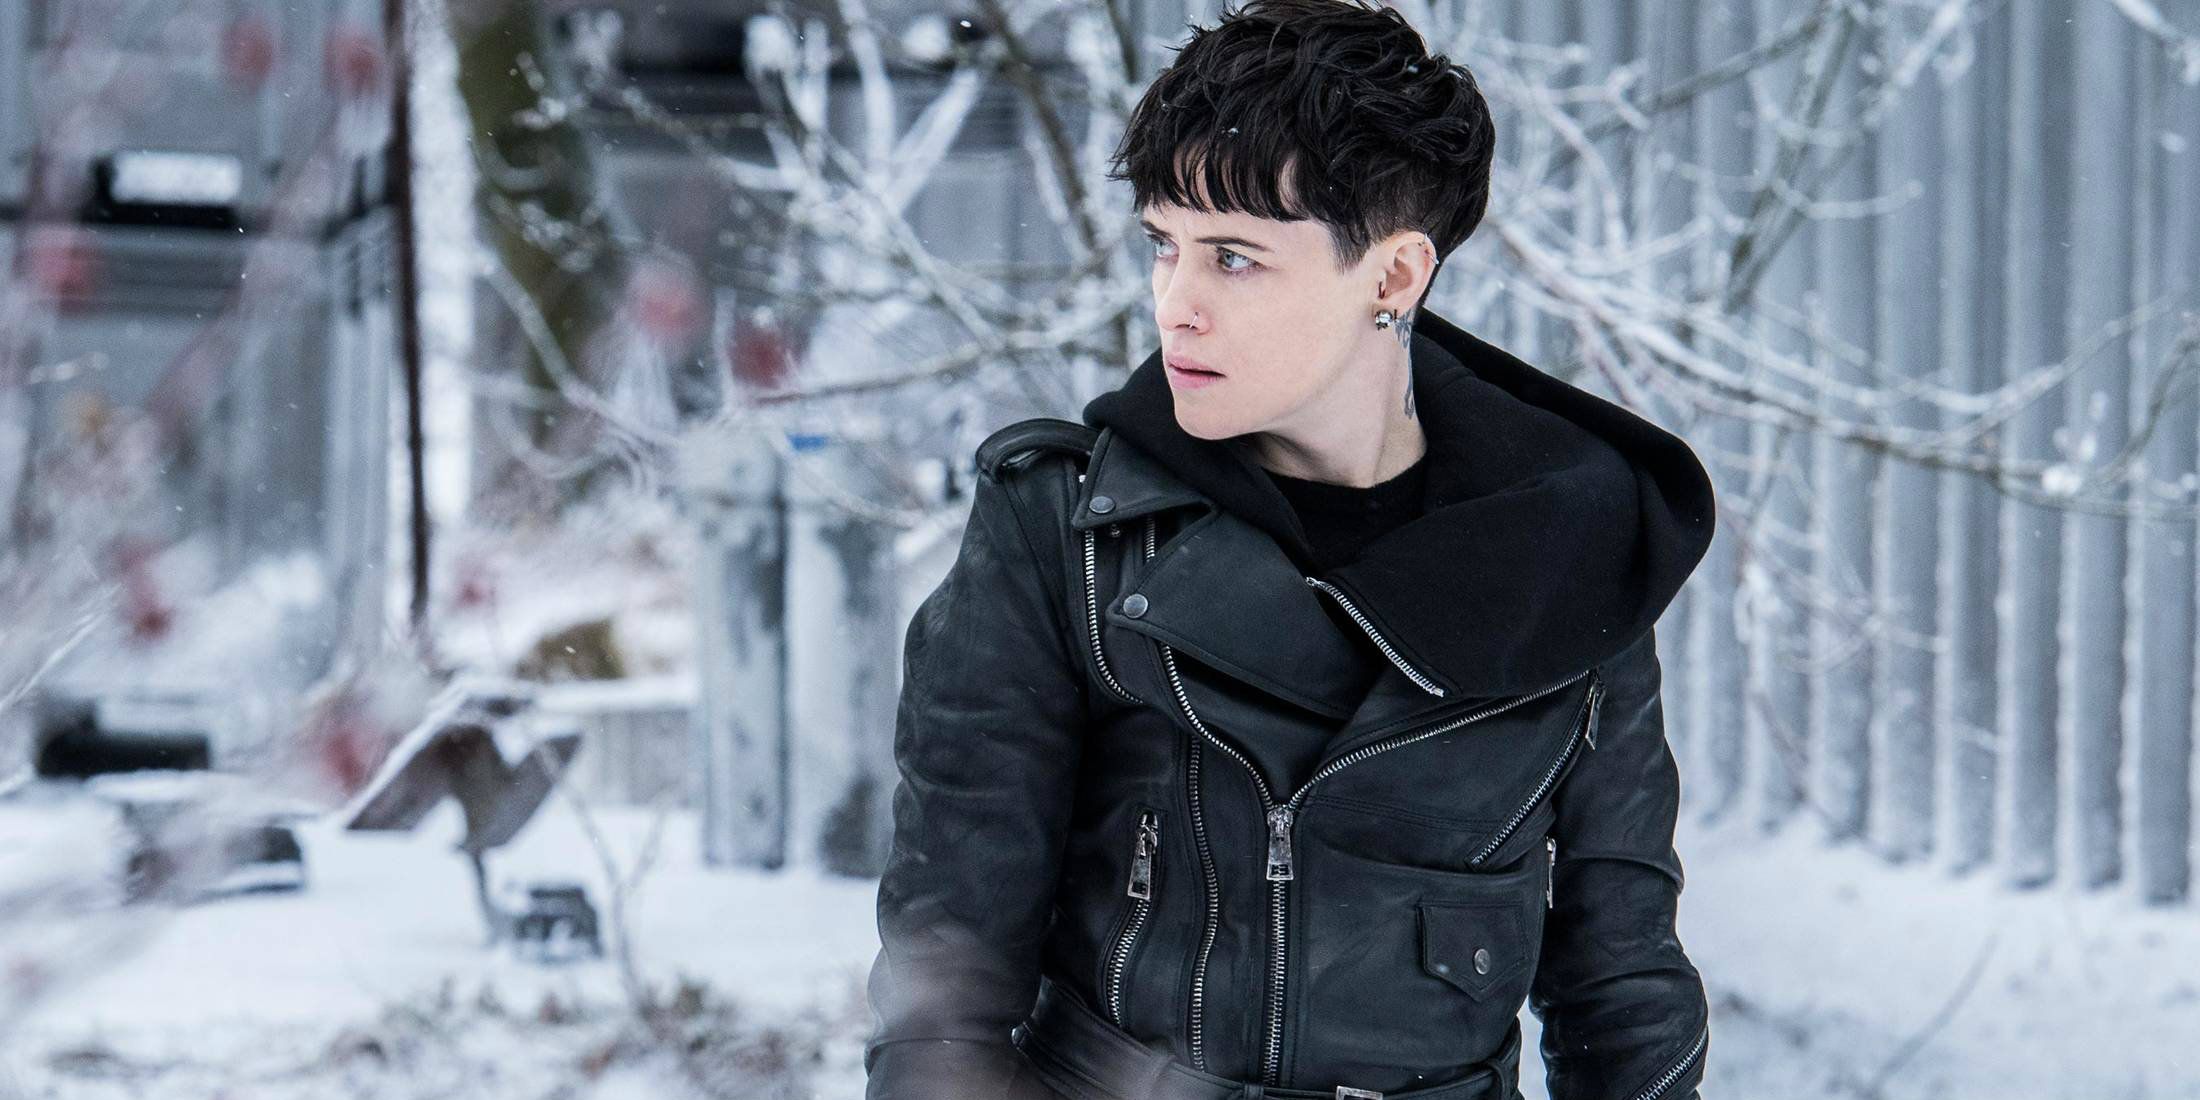 Claire Foy appears in leather and with short dark hair in The Girl In The Spider's Web